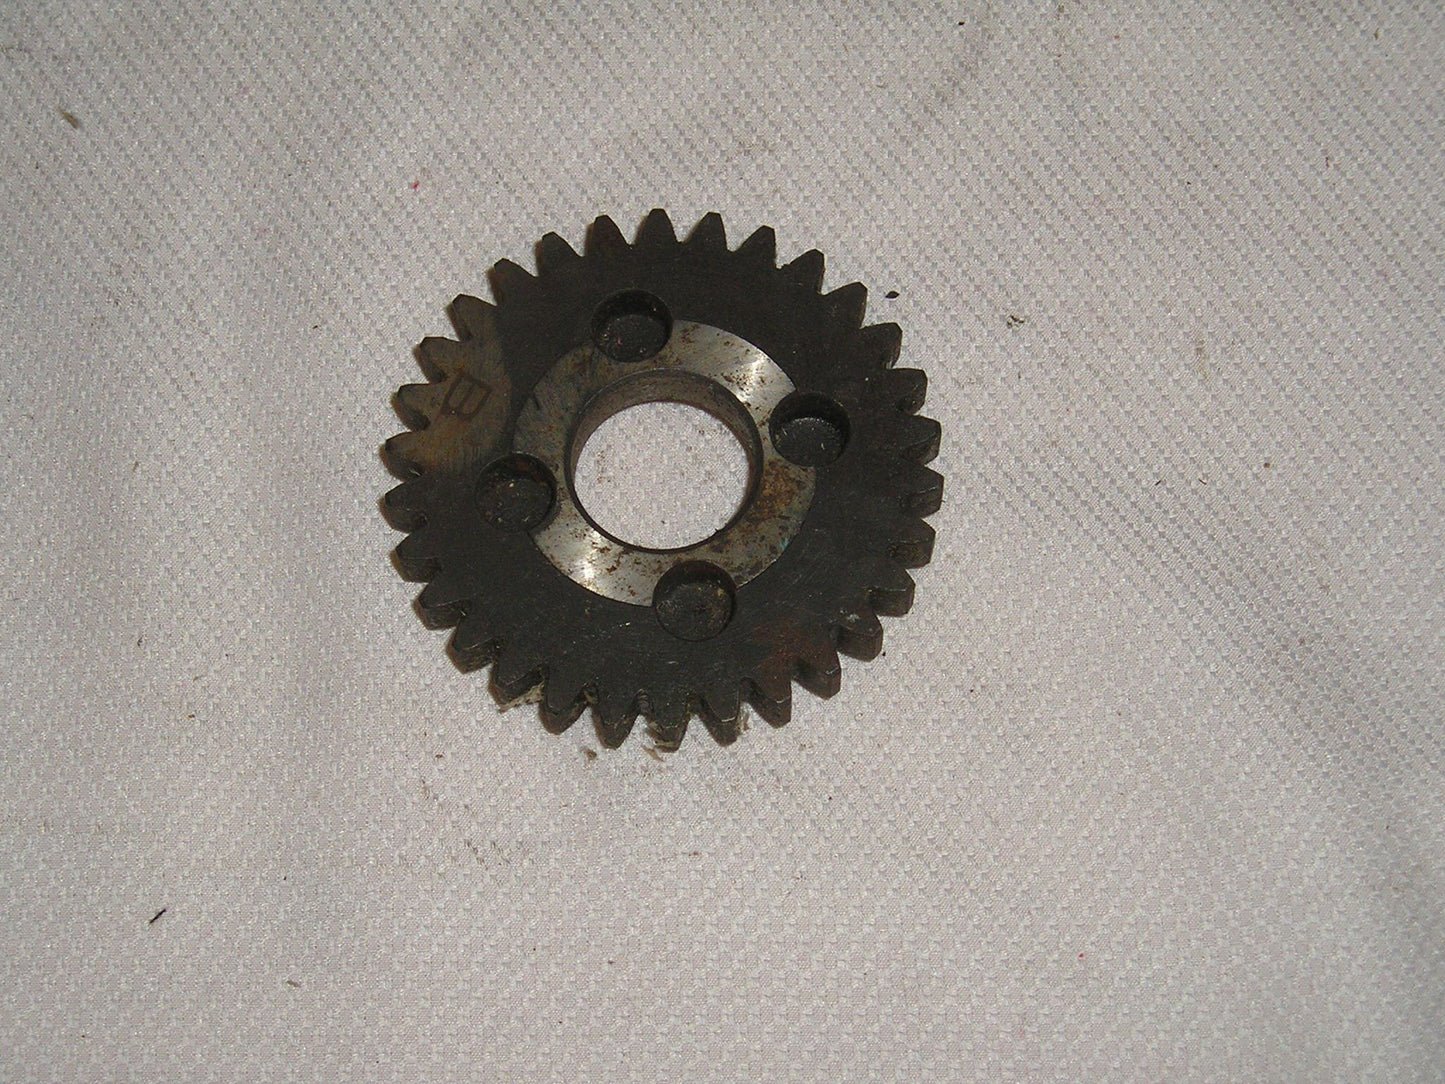 PUCH SEARS ALLSTATE MOPED TWINGLE Transmission Gear 30T (C)